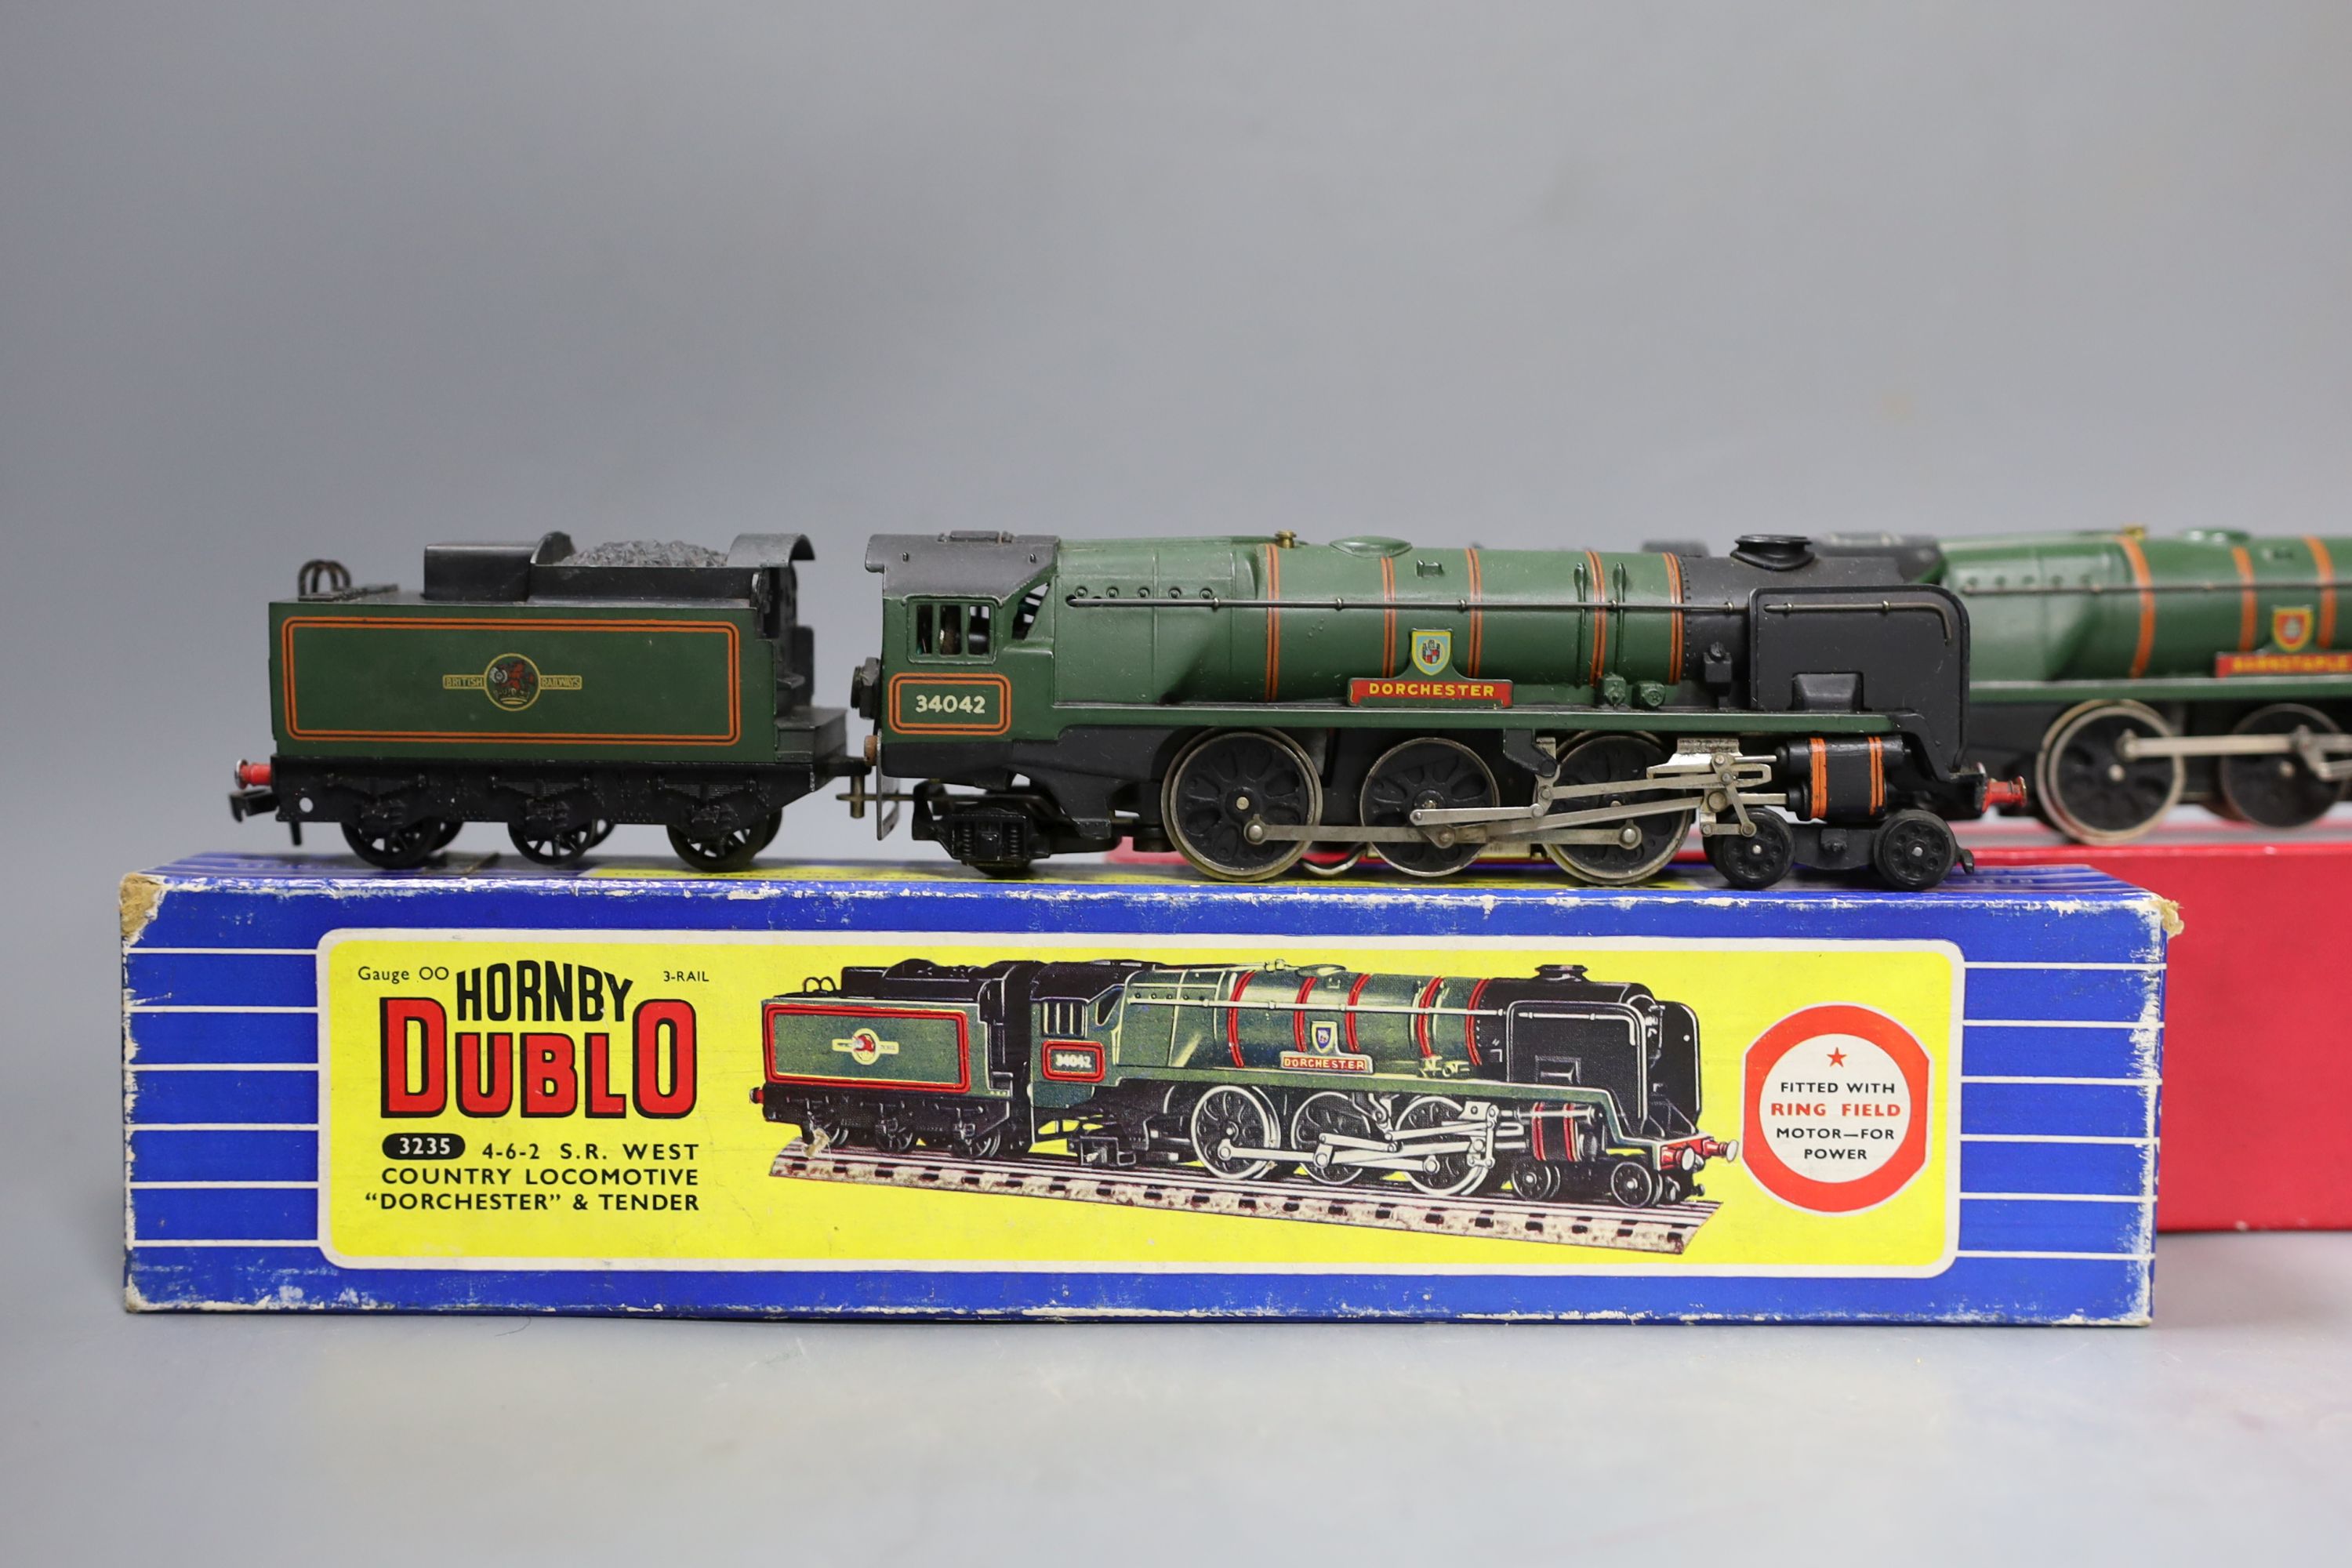 Two Hornby Dublo locomotives and tenders – 3235 4-6-2 S.R. West Country locomotive Dorchester and - Image 3 of 4